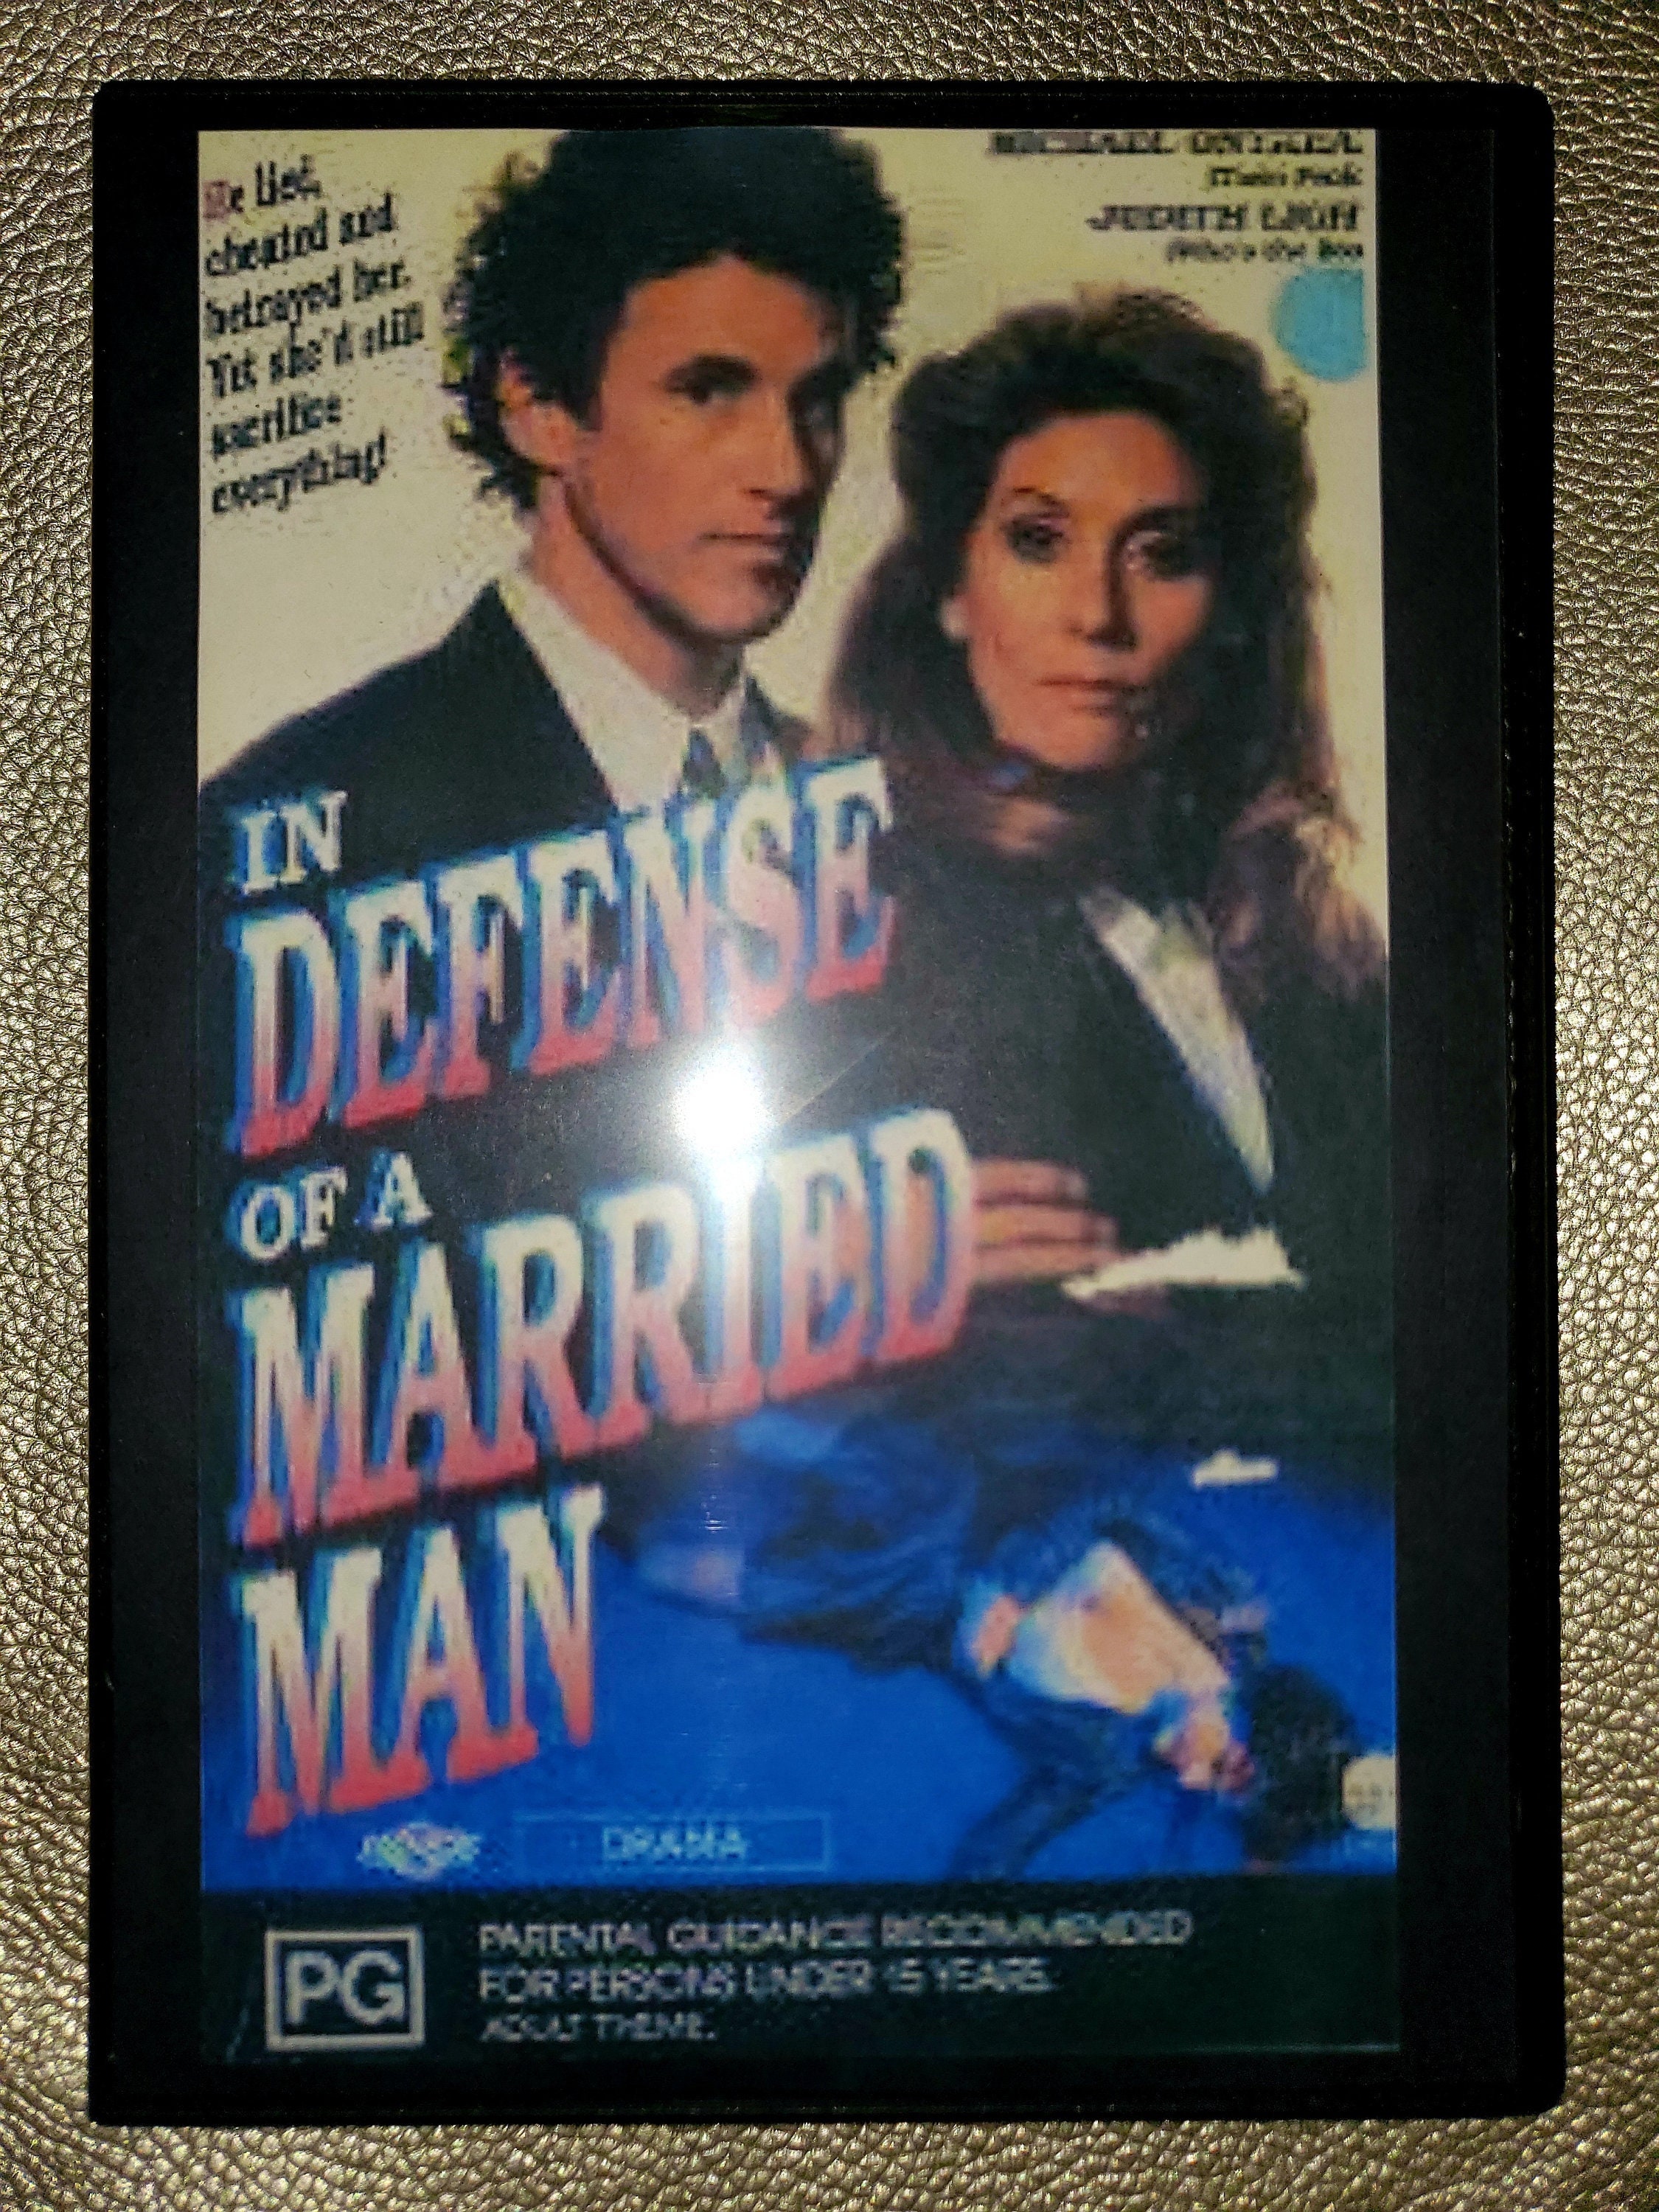 In Defense of A Married Mandvd 1990 Judith Light johnny image pic